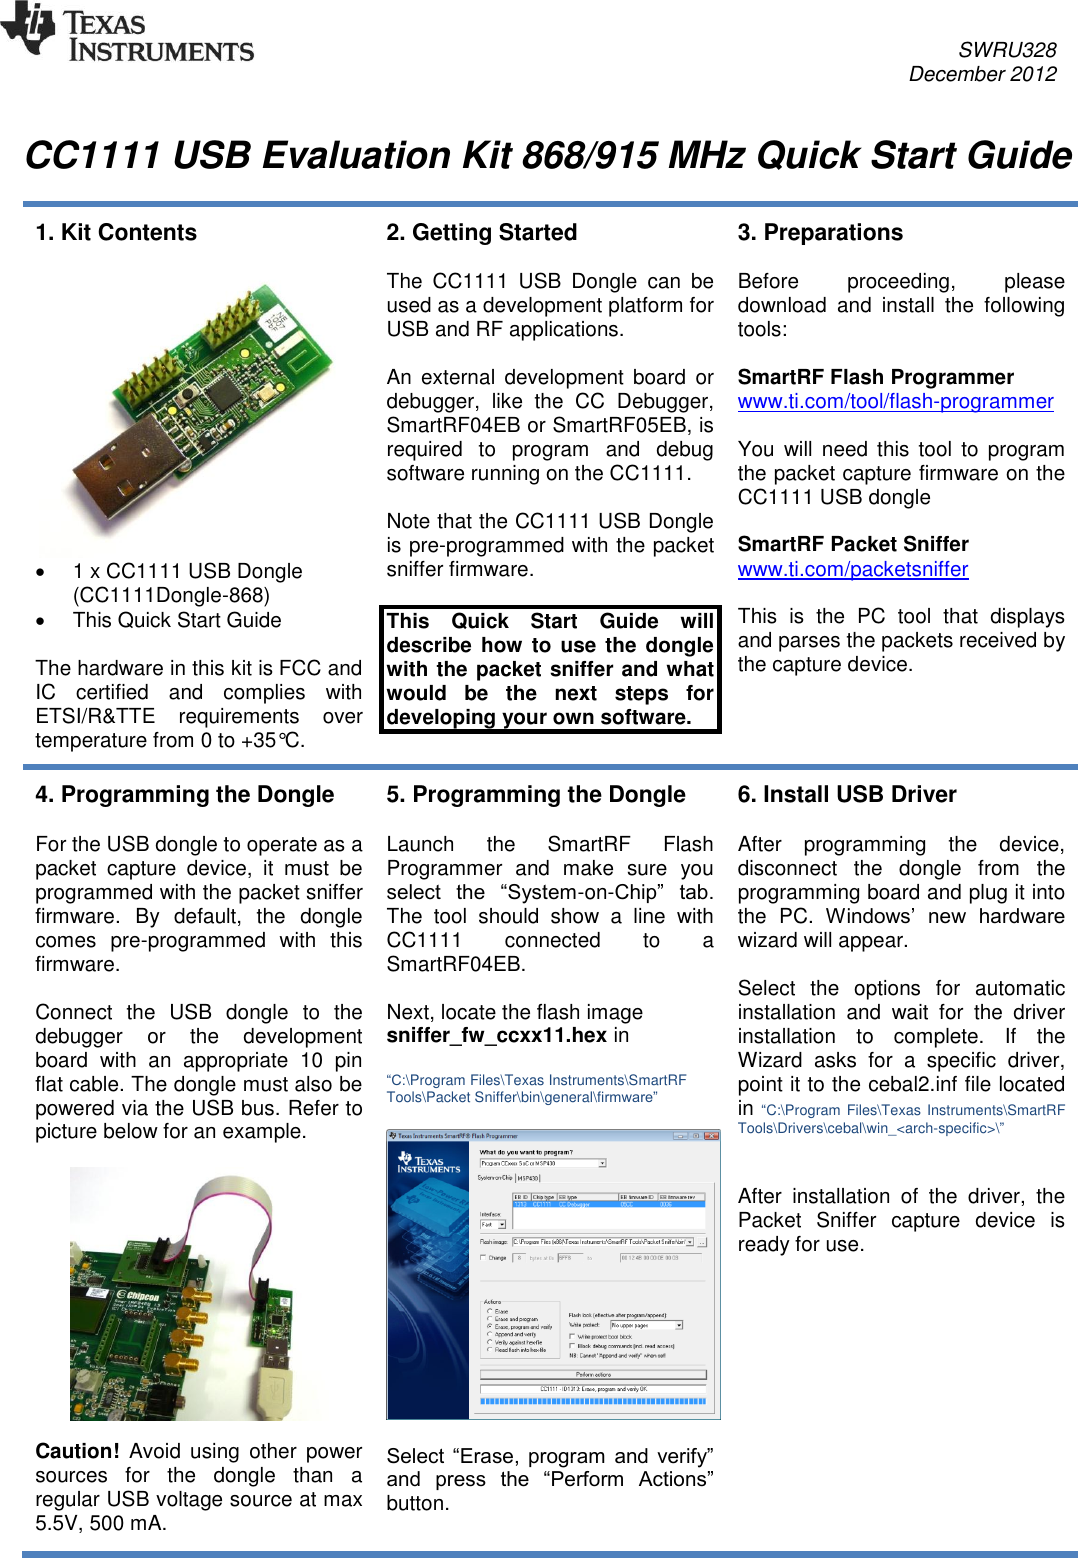     SWRU328     December 2012   CC1111 USB Evaluation Kit 868/915 MHz Quick Start Guide  1. Kit Contents     1 x CC1111 USB Dongle (CC1111Dongle-868)    This Quick Start Guide  The hardware in this kit is FCC and IC  certified  and  complies  with ETSI/R&amp;TTE  requirements  over temperature from 0 to +35°C. 2. Getting Started  The  CC1111  USB  Dongle  can  be used as a development platform for USB and RF applications.  An  external  development  board  or debugger,  like  the  CC  Debugger, SmartRF04EB or SmartRF05EB, is required  to  program  and  debug software running on the CC1111.  Note that the CC1111 USB Dongle is pre-programmed with the packet sniffer firmware.  This  Quick  Start  Guide  will describe how  to  use  the  dongle with the packet sniffer and what would  be  the  next  steps  for developing your own software. 3. Preparations  Before  proceeding,  please download  and  install  the  following tools:  SmartRF Flash Programmer www.ti.com/tool/flash-programmer   You  will  need  this  tool  to  program the packet capture firmware on the CC1111 USB dongle  SmartRF Packet Sniffer www.ti.com/packetsniffer   This  is  the  PC  tool  that  displays and parses the packets received by the capture device.  4. Programming the Dongle  For the USB dongle to operate as a packet  capture  device,  it  must  be programmed with the packet sniffer firmware.  By  default,  the  dongle comes  pre-programmed  with  this firmware.  Connect  the  USB  dongle  to  the debugger  or  the  development board  with  an  appropriate  10  pin flat cable. The dongle must also be powered via the USB bus. Refer to picture below for an example.     Caution!  Avoid  using  other  power sources  for  the  dongle  than  a regular USB voltage source at max 5.5V, 500 mA.  5. Programming the Dongle  Launch  the  SmartRF  Flash Programmer  and  make  sure  you select  the  “System-on-Chip”  tab. The  tool  should  show  a  line  with CC1111  connected  to  a SmartRF04EB.  Next, locate the flash image sniffer_fw_ccxx11.hex in  “C:\Program Files\Texas Instruments\SmartRF Tools\Packet Sniffer\bin\general\firmware”    Select  “Erase,  program  and  verify” and  press  the  “Perform  Actions” button.  6. Install USB Driver  After  programming  the  device, disconnect  the  dongle  from  the programming board and plug it into the  PC.  Windows’  new  hardware wizard will appear.   Select  the  options  for  automatic installation  and  wait  for  the  driver installation  to  complete.  If  the Wizard  asks  for  a  specific  driver, point it to the cebal2.inf file located in “C:\Program  Files\Texas  Instruments\SmartRF Tools\Drivers\cebal\win_&lt;arch-specific&gt;\”   After  installation  of  the  driver,  the Packet  Sniffer  capture  device  is ready for use. 